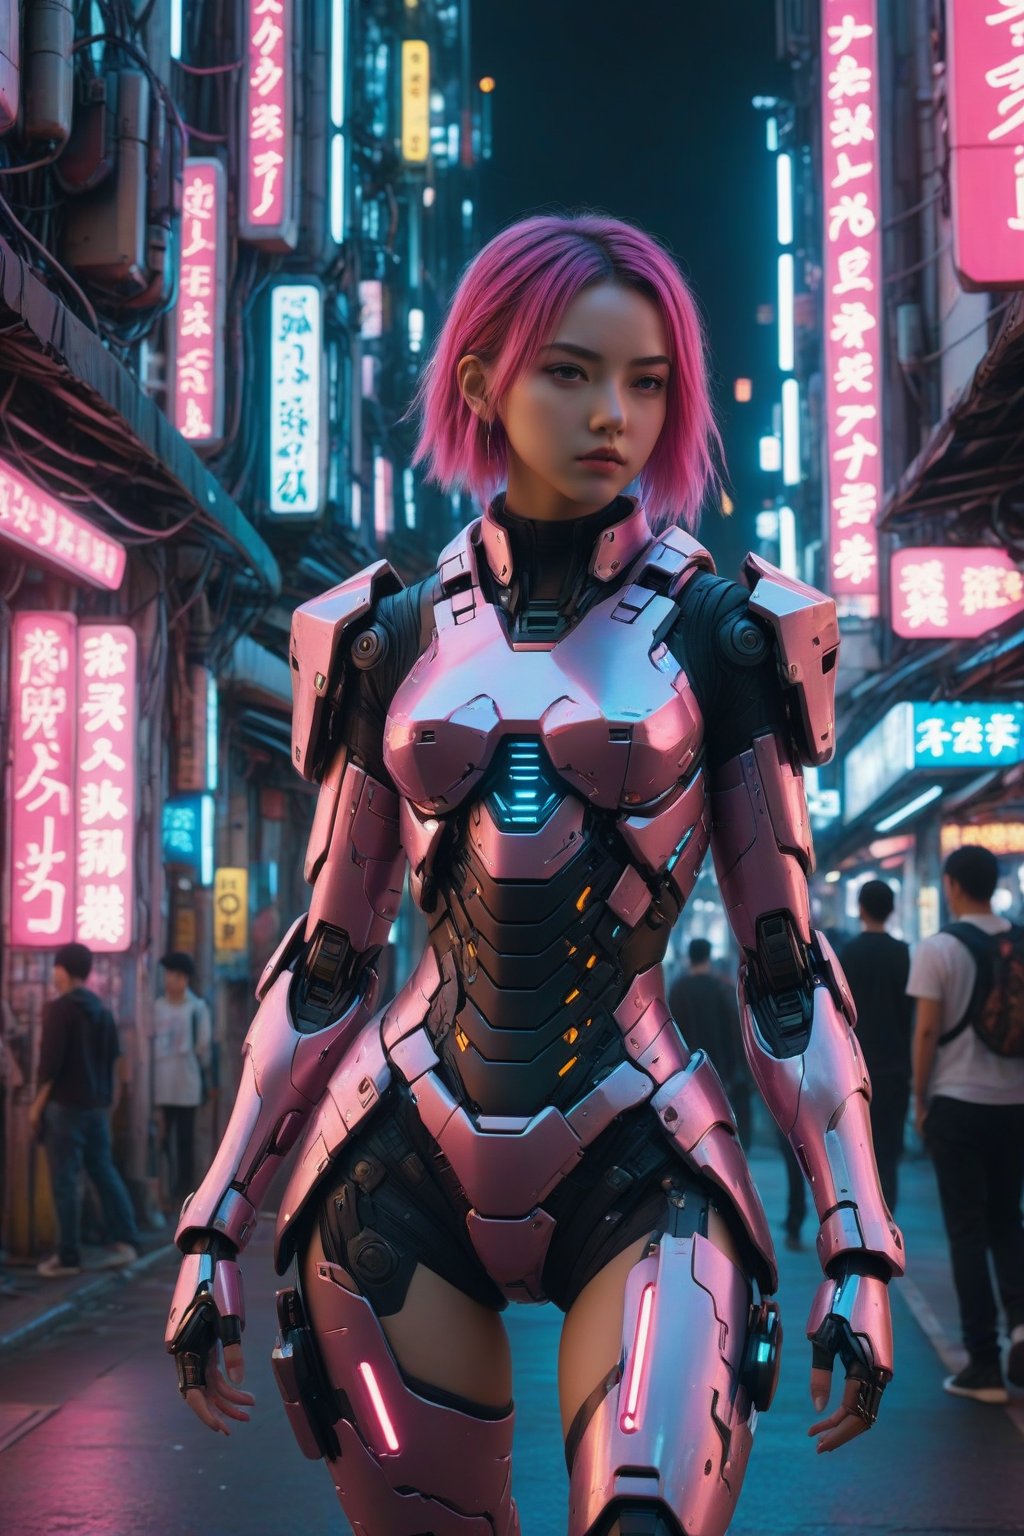 score_9, score_8_up, score_7_up, score_6_up, score_5_up, score_4_up, 
(masterpiece, best quality, 4k, 8k, highres:1.3), ultra-detailed, cute mecha girl walking, cyberpunk city streets, pink and white armor, neon lights, animated facial expressions, vibrant urban setting, holographic advertisements, playful demeanor, FuturEvoLab-Lora-Cyberpunk